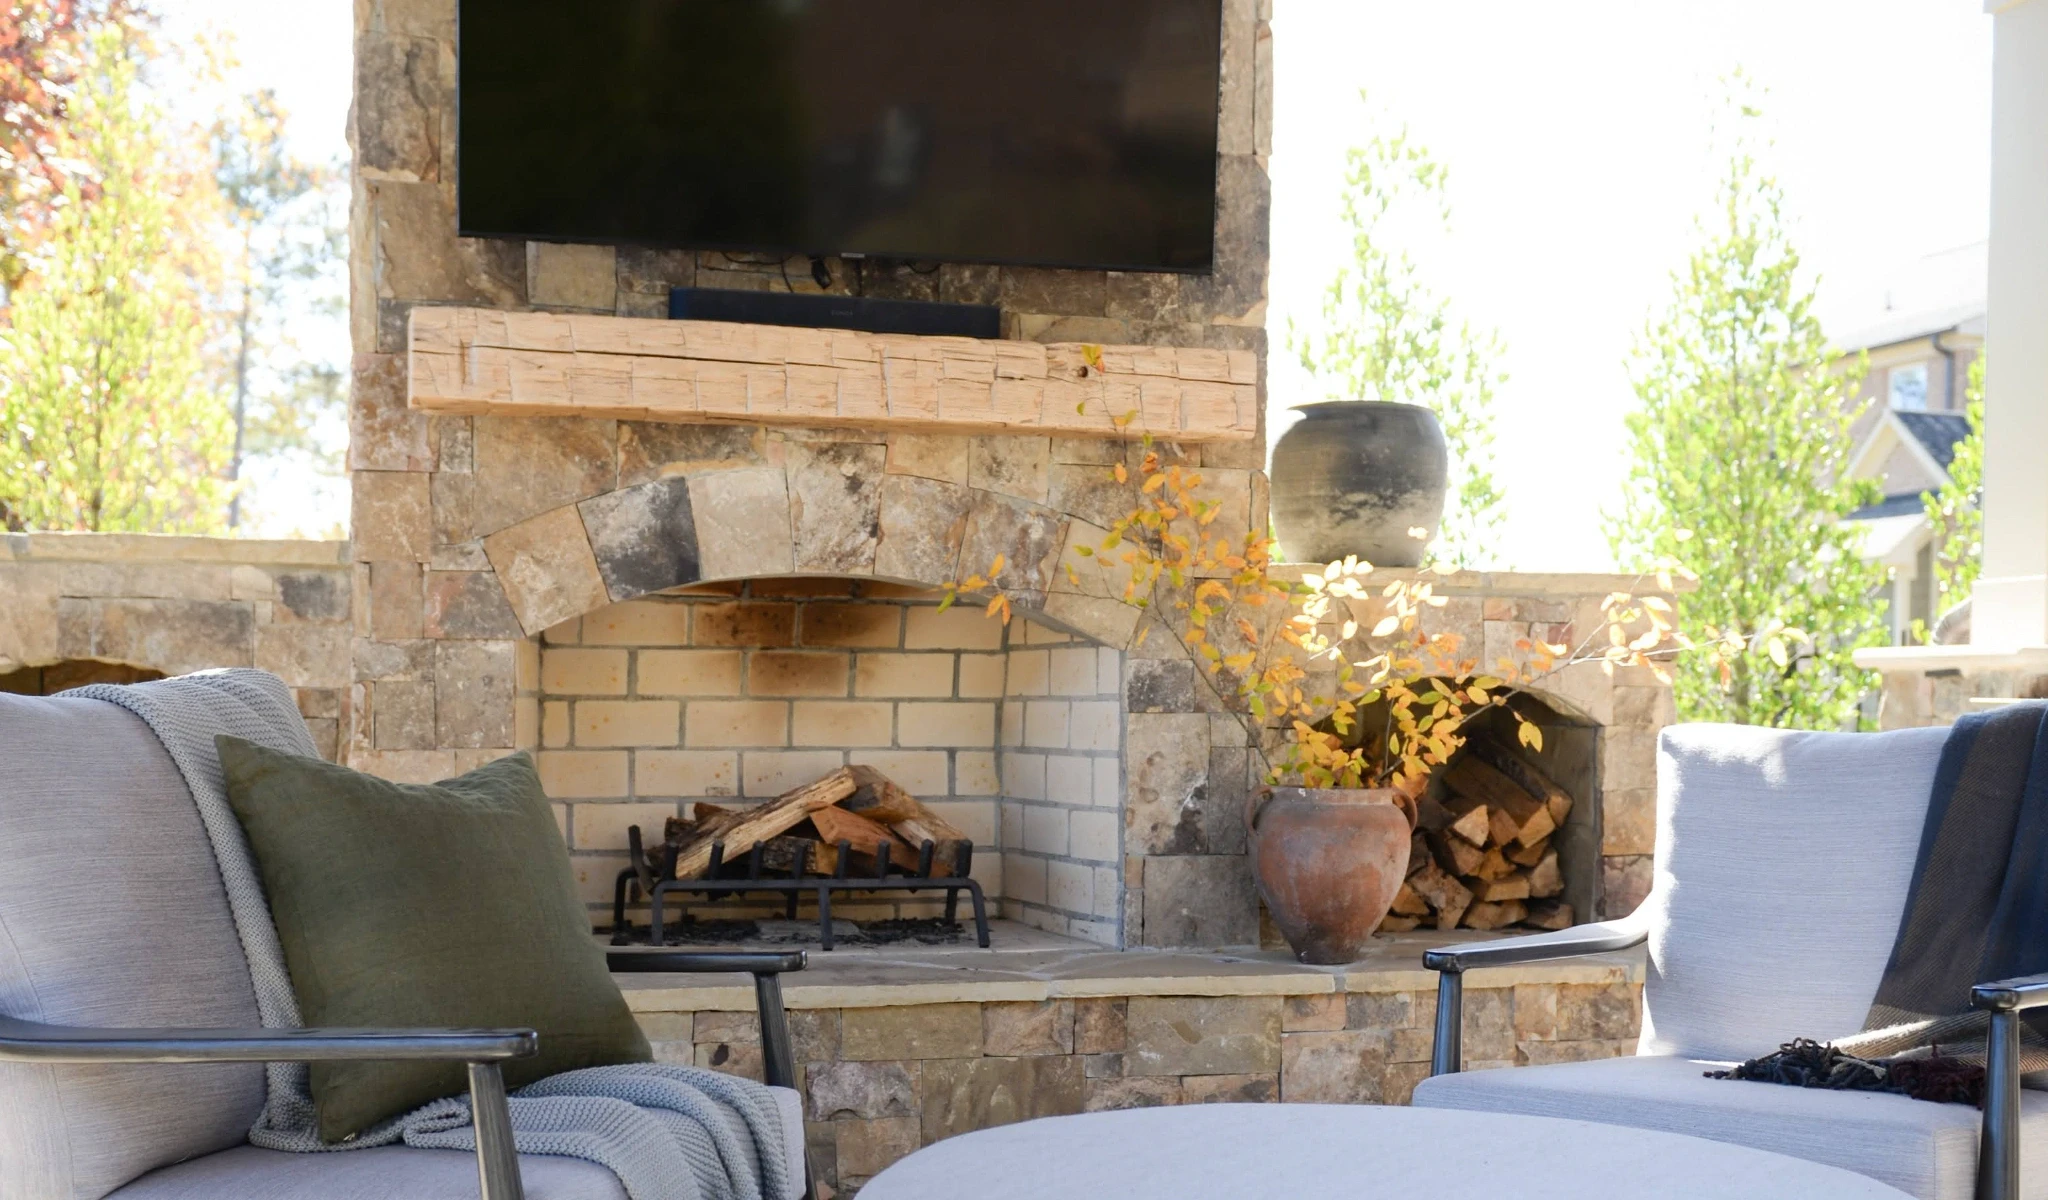 An outdoor fireplace with a TV mounted above it, designed by a custom home builder.